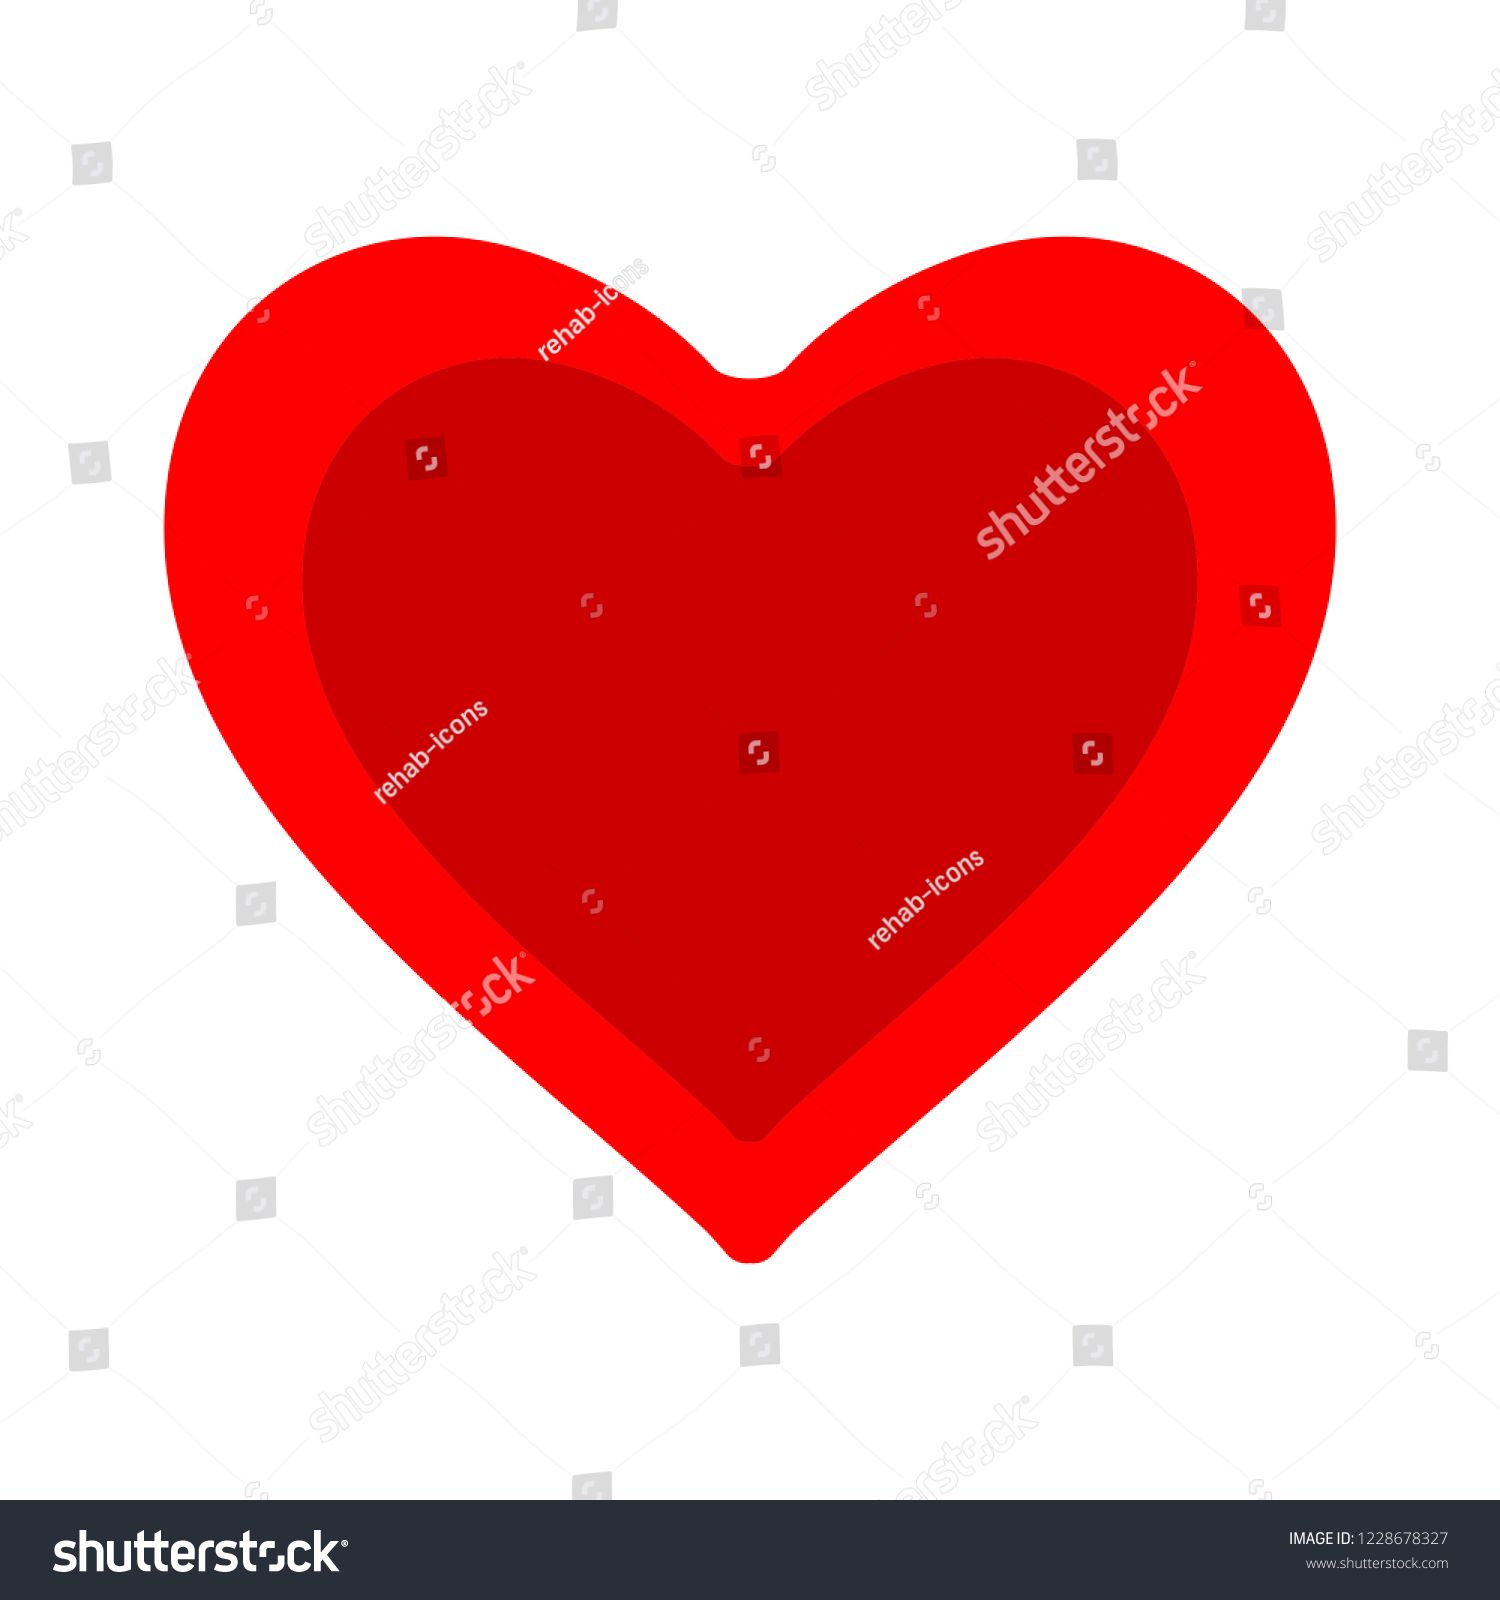 copy and paste heart heart